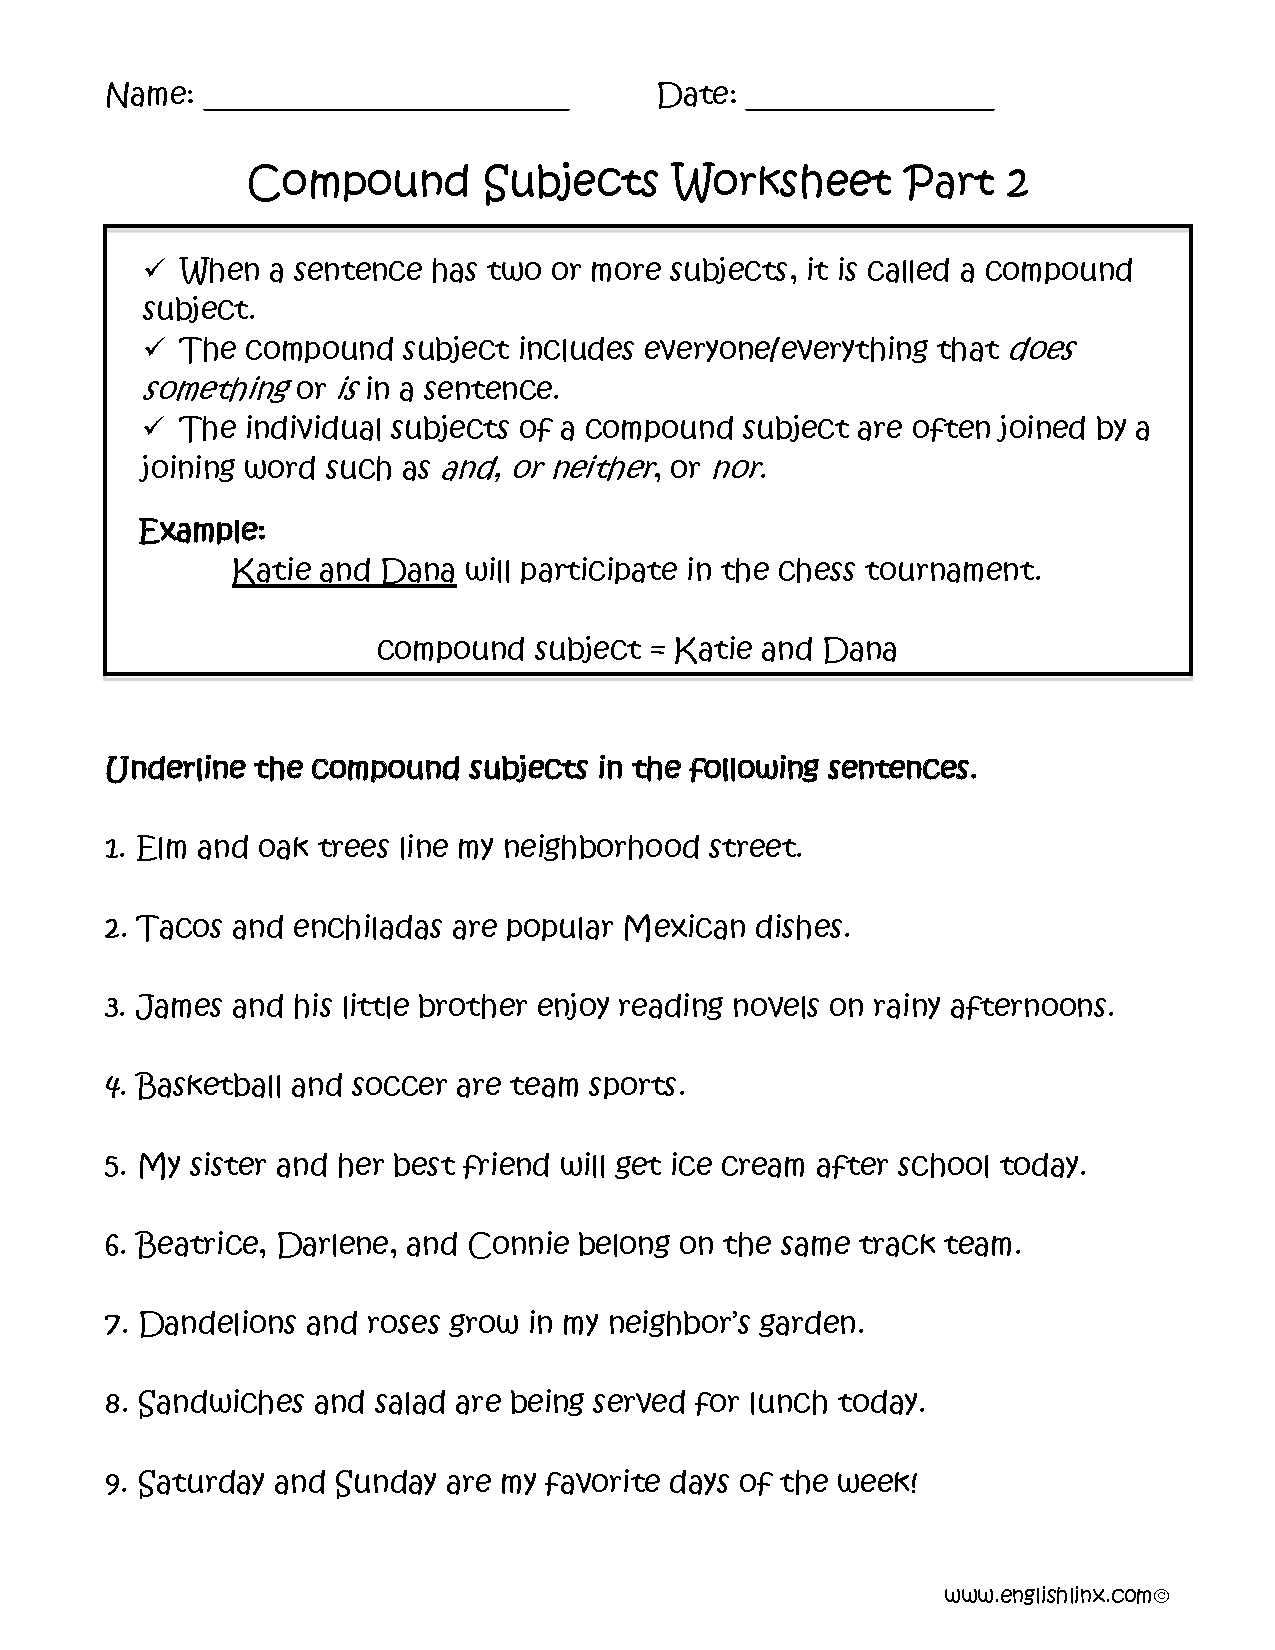 Compound Subject Worksheet Part 2